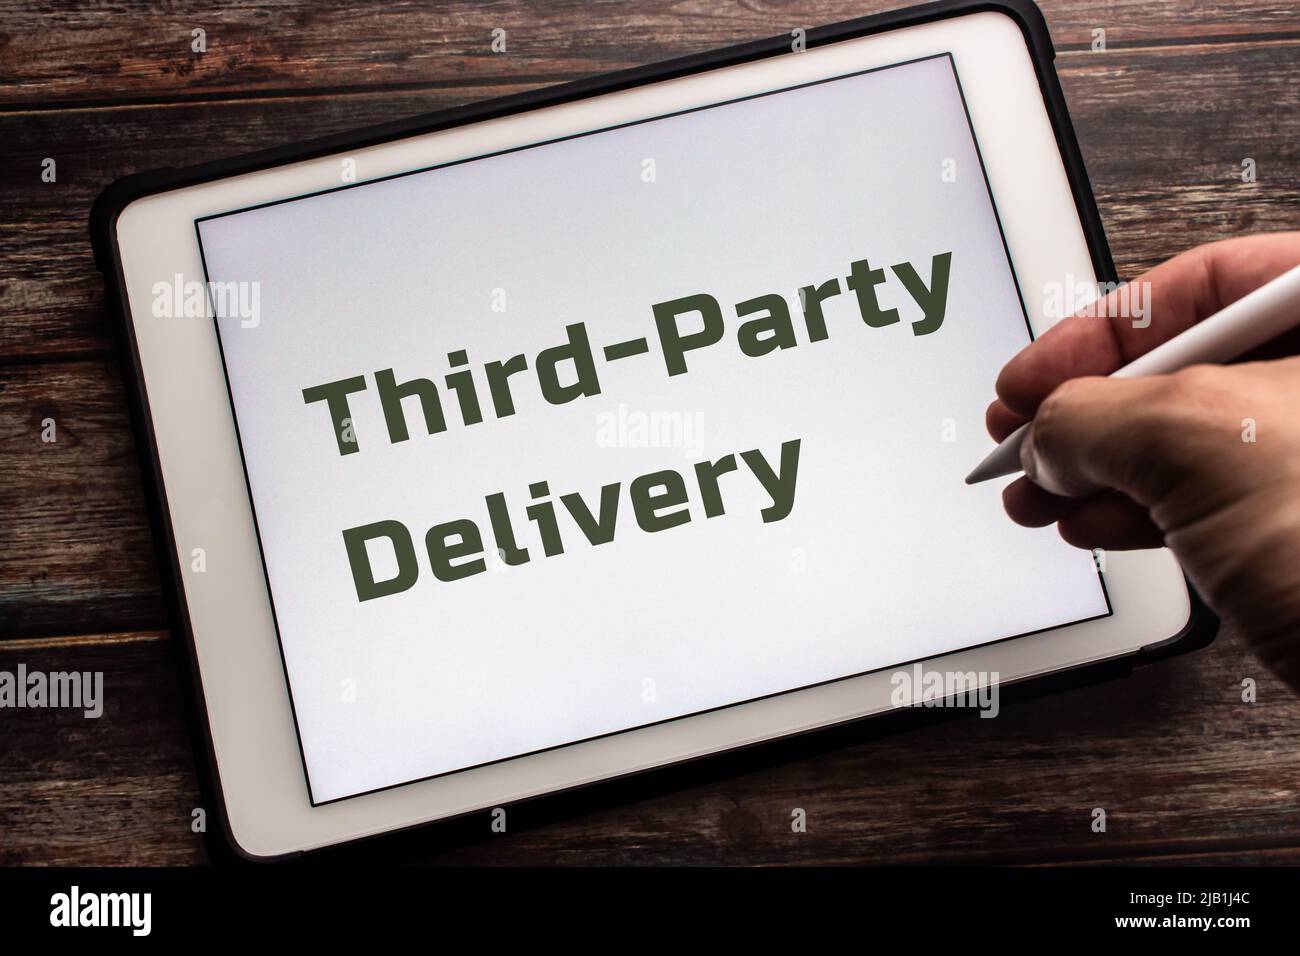 Closeup keyword Third-Party Delivery on tablet. Outsourcing delivery to a 3rd-party company and paying them a fee concept. Man holding stylus pen Stock Photo